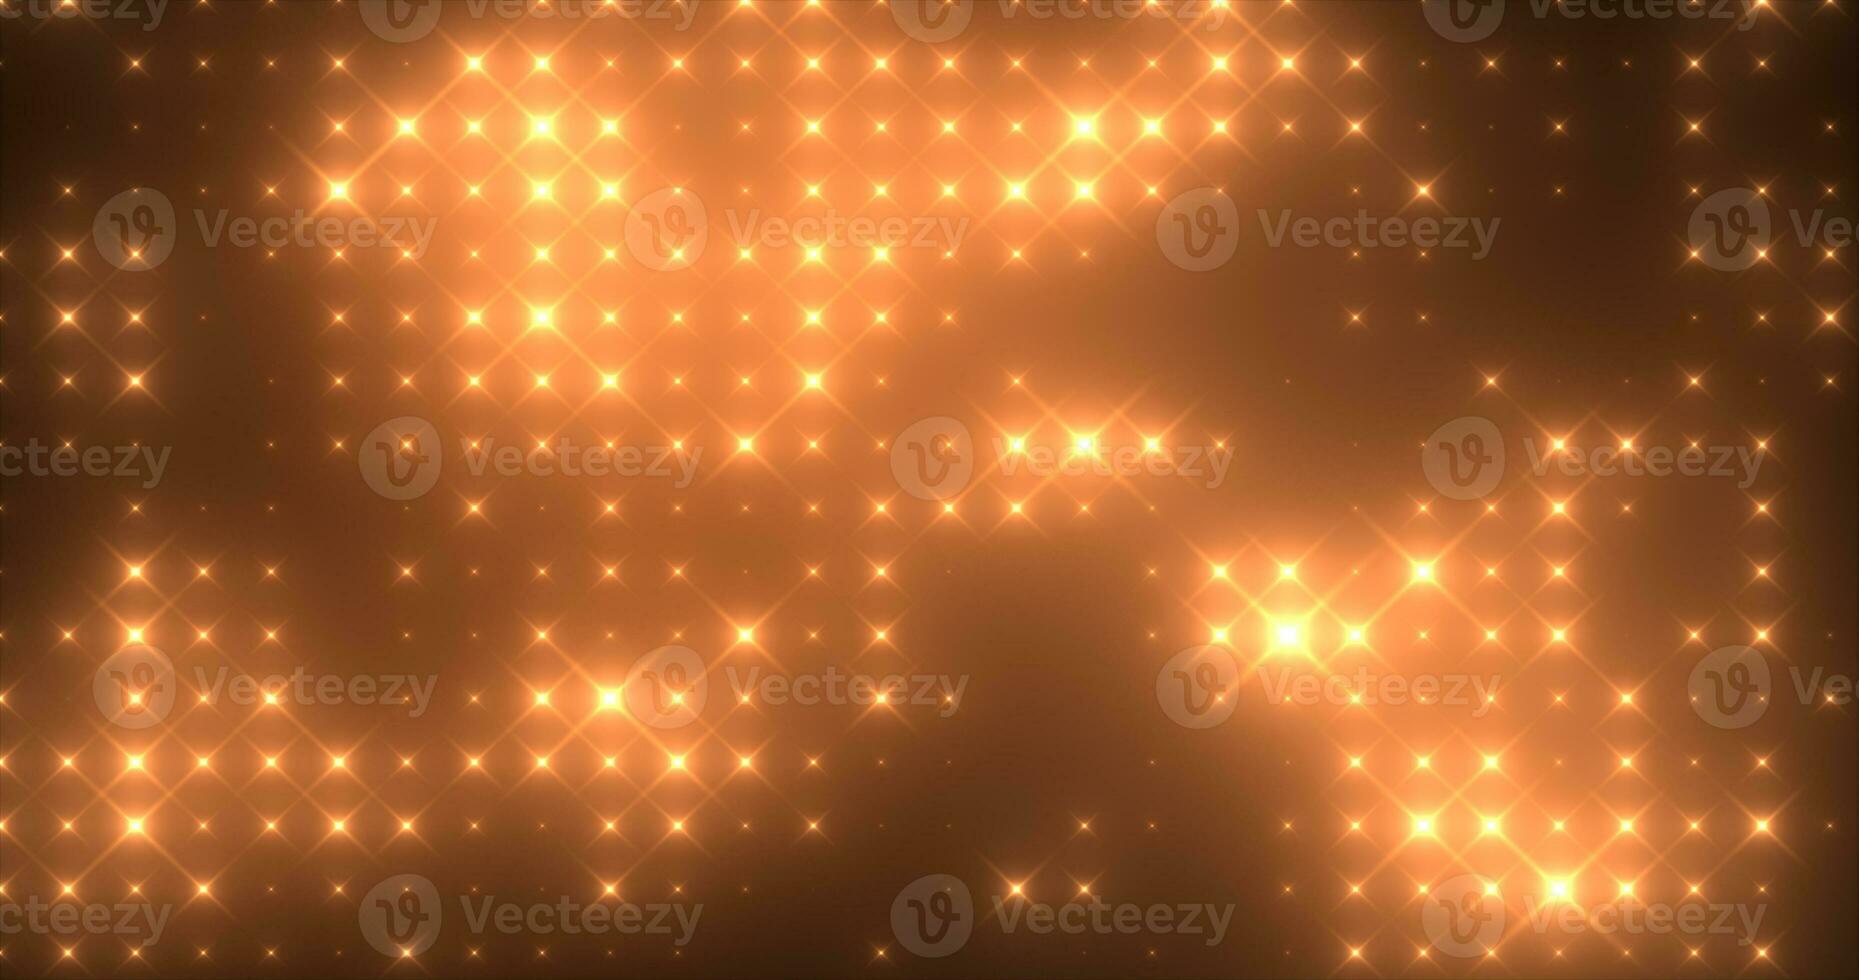 Abstract loop glowing yellow orange disco wall with bright light bulbs abstract background photo